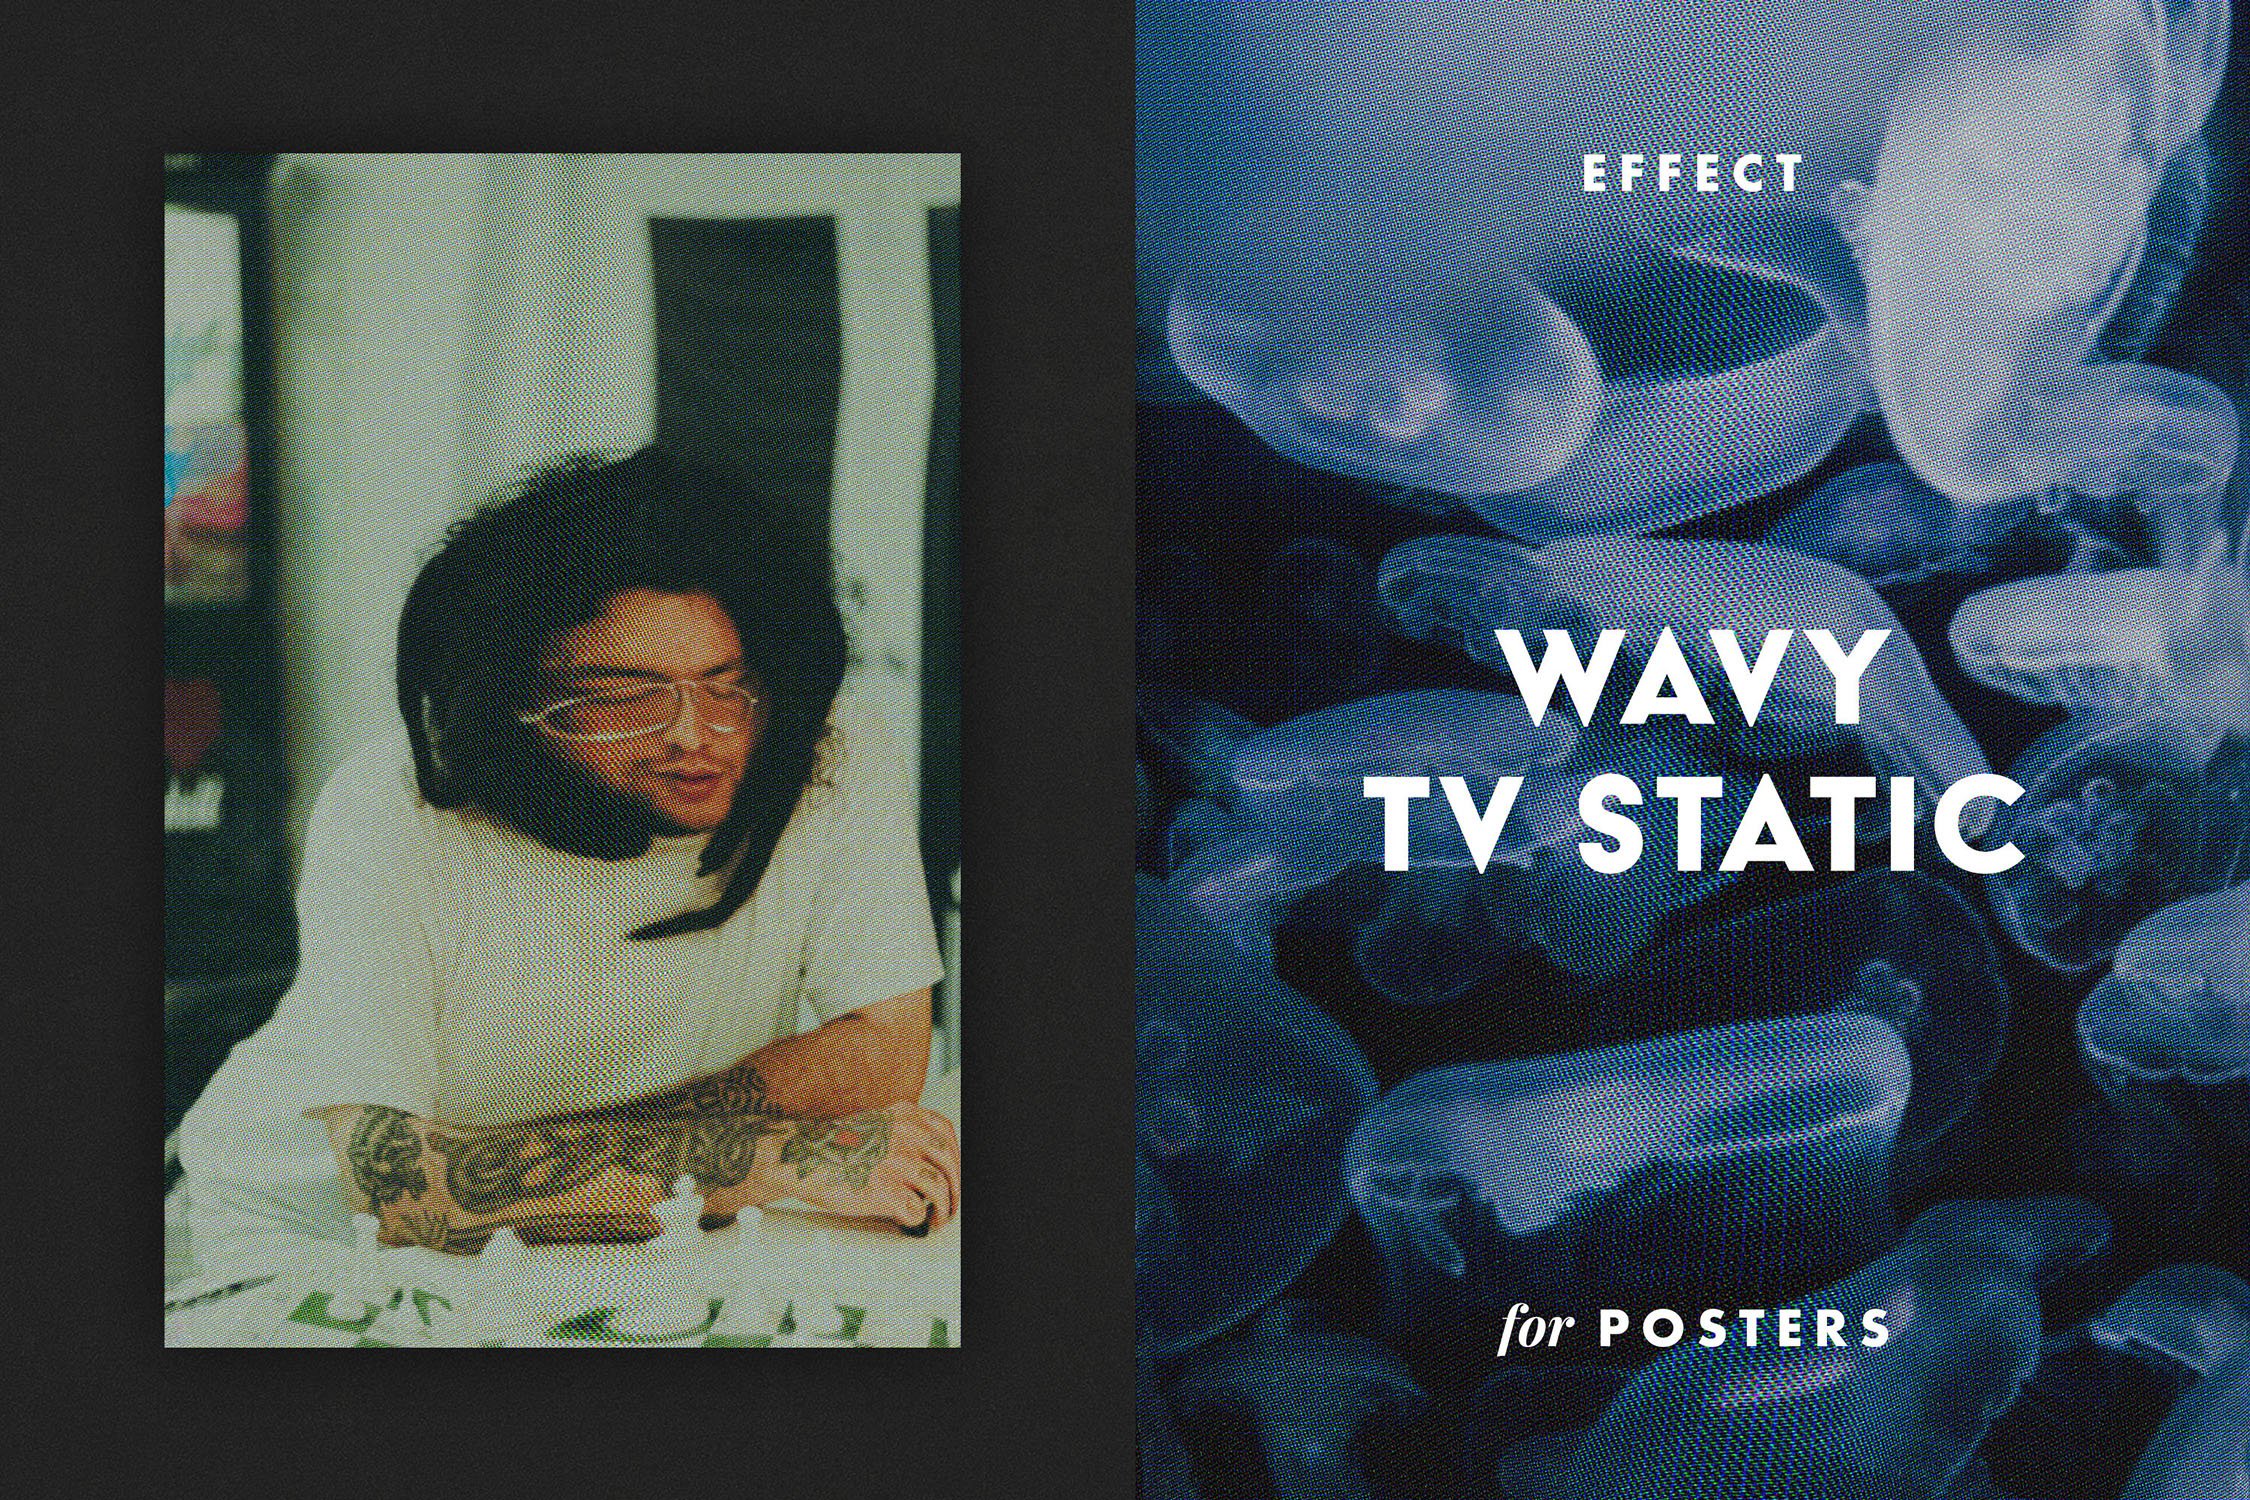 Wavy TV Static: Poster Effectcover image.